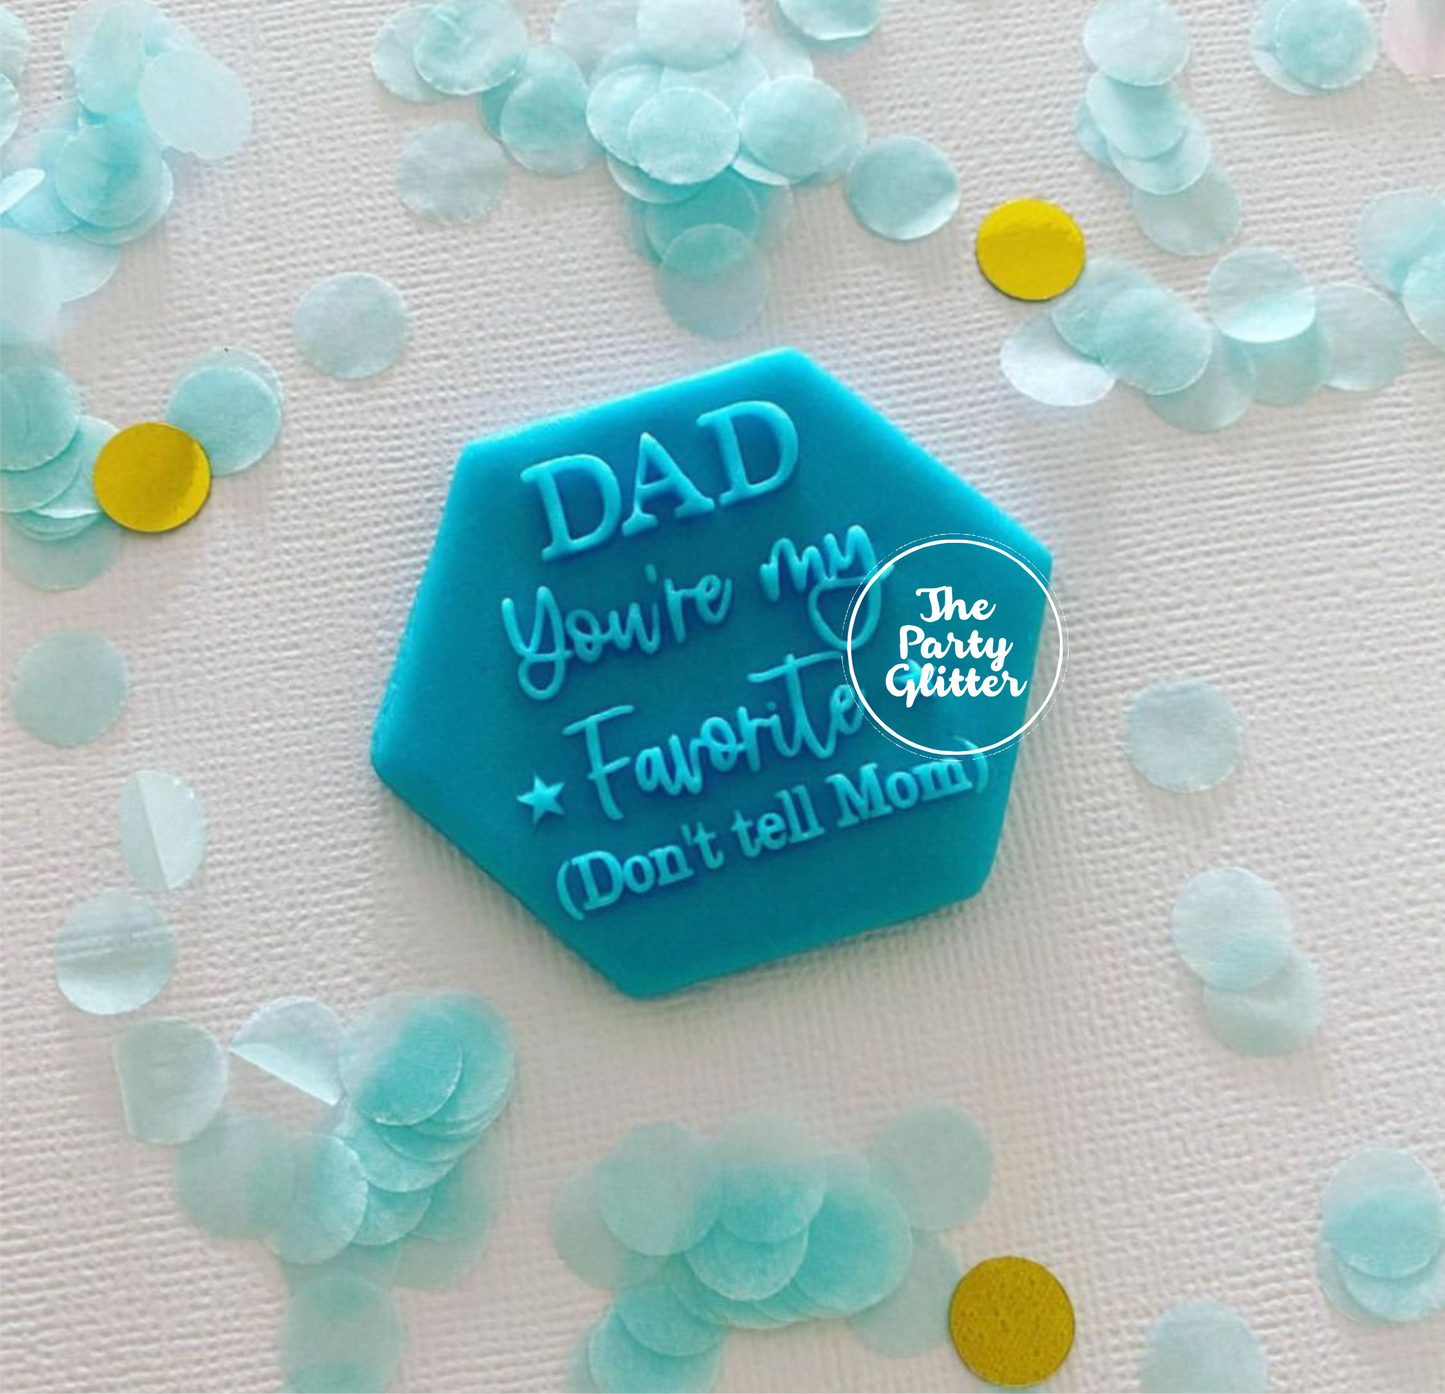 DAD your are my favorite (don't tell my mom) Fathers day Popup! Stamp